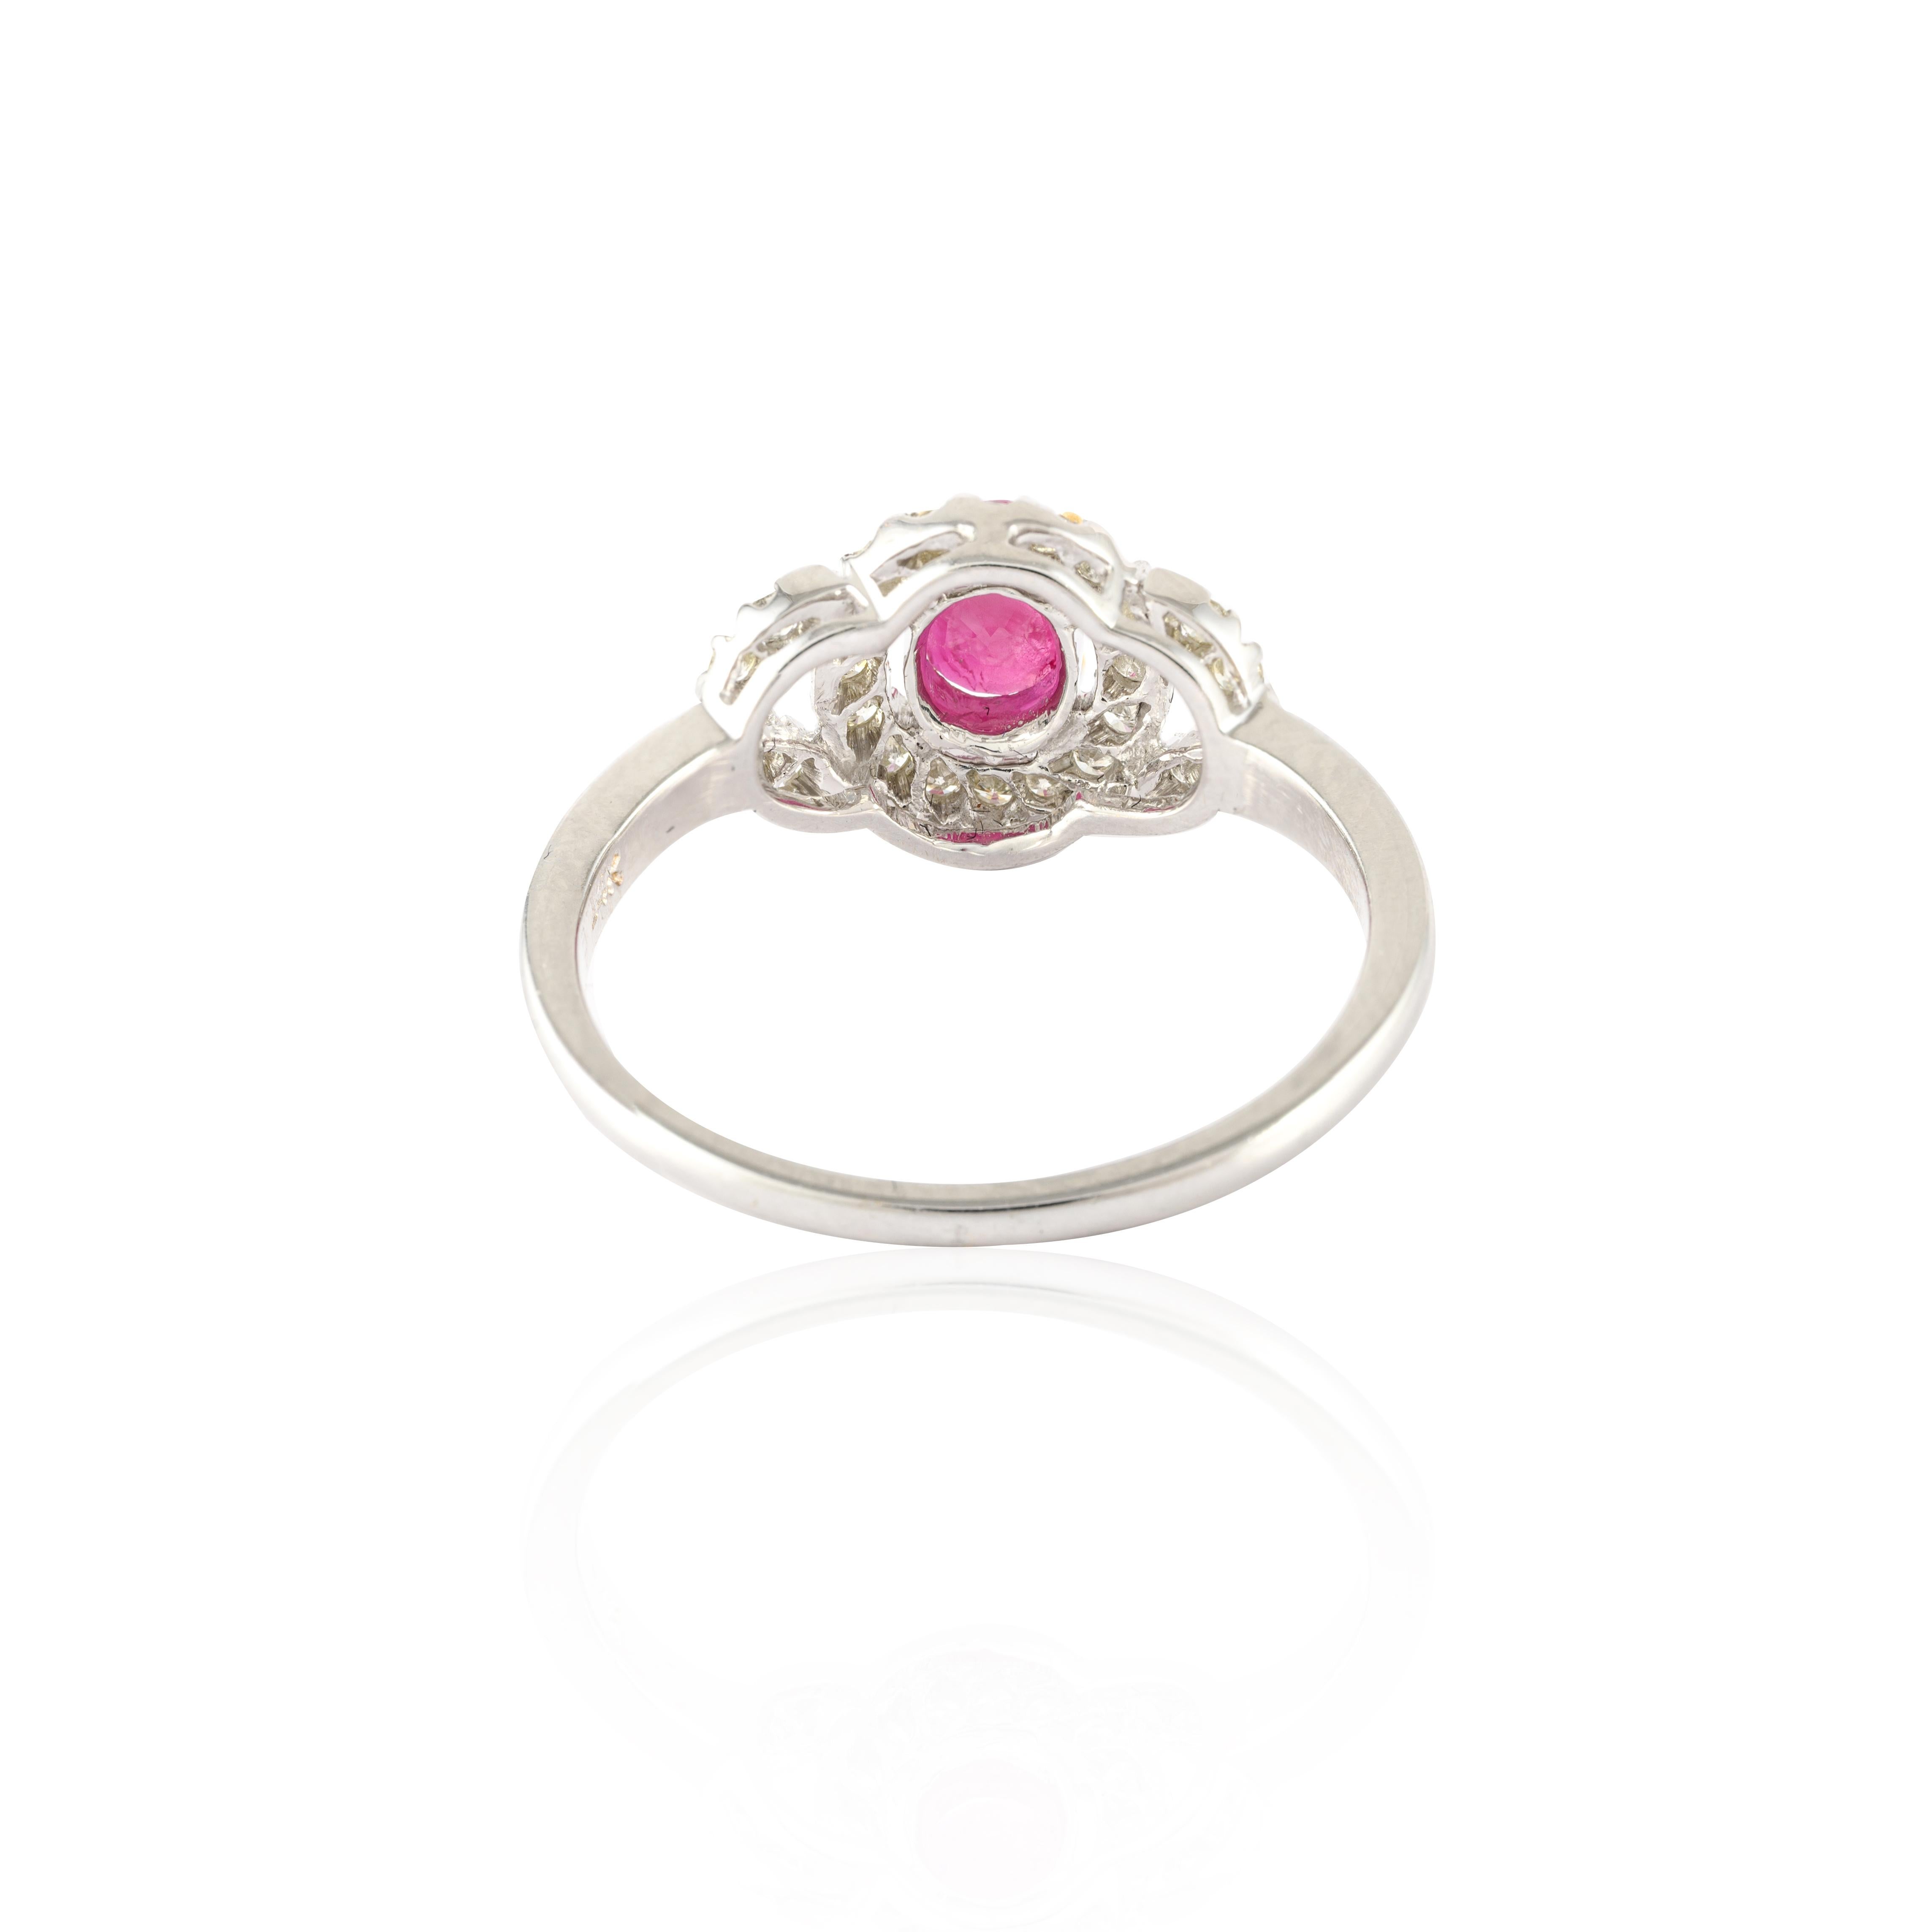 For Sale:  Diamond Ruby Women Bridal Ring in 14K Solid White Gold 7